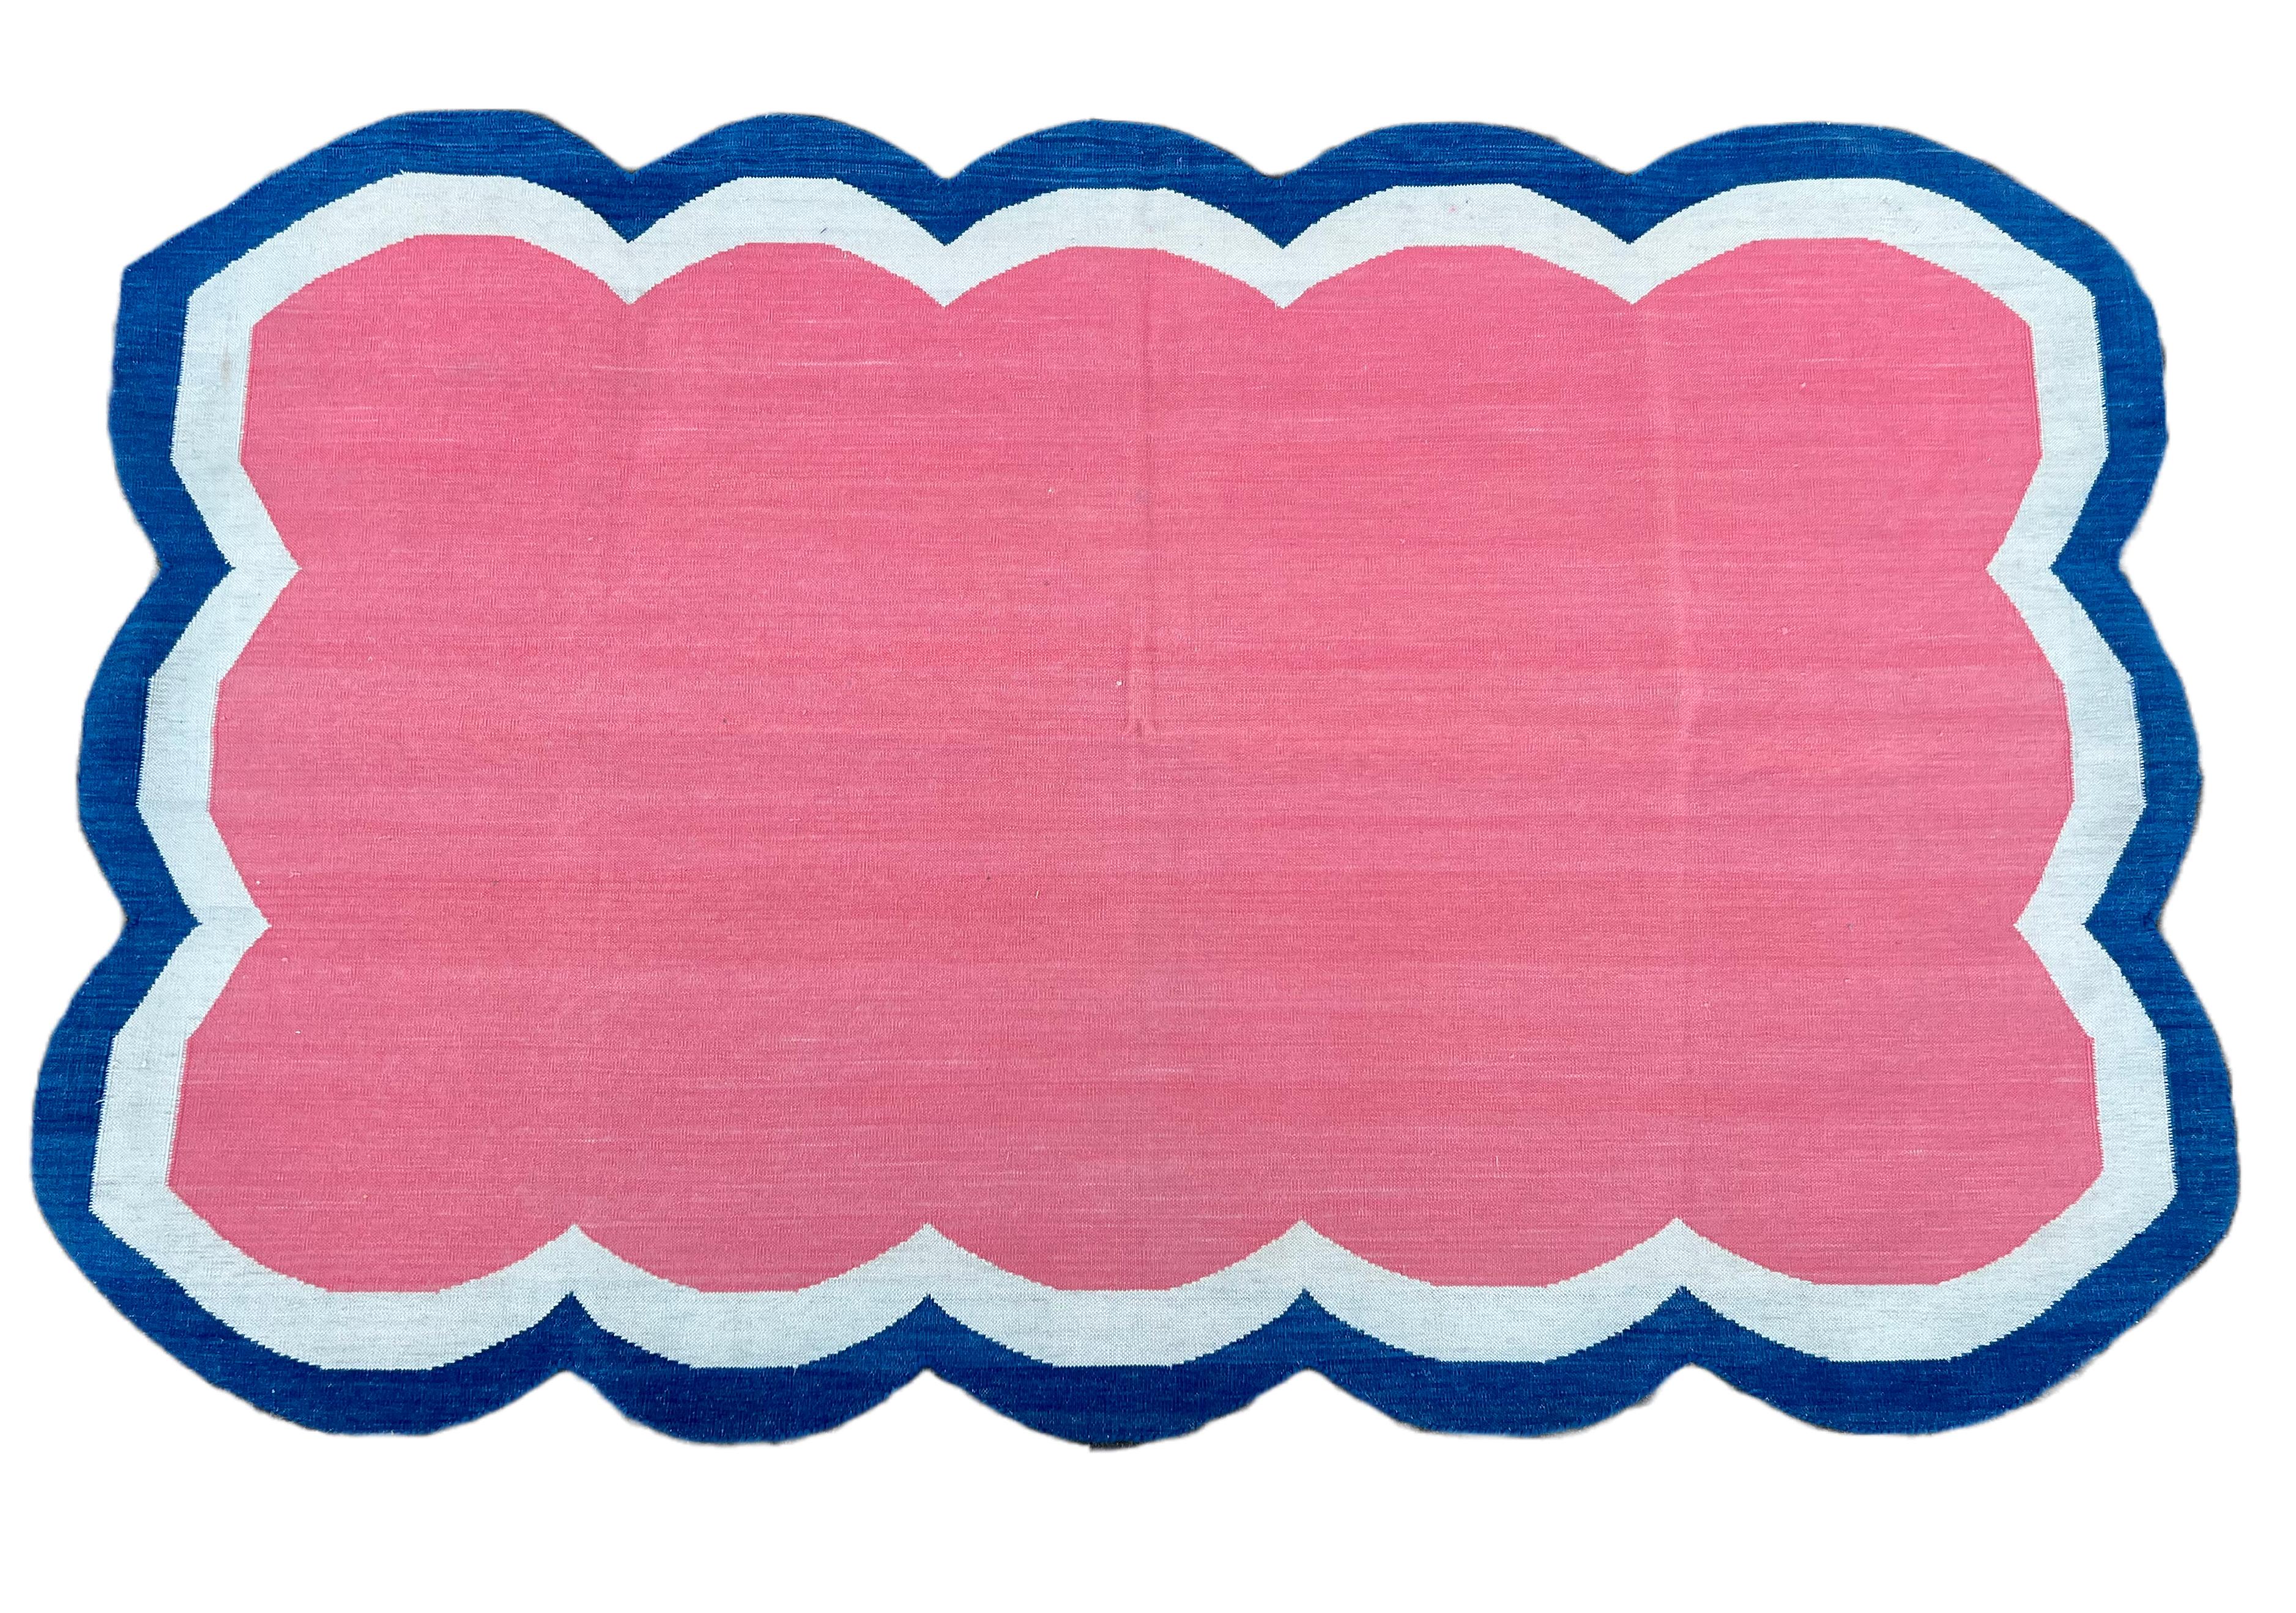 Handmade Cotton Area Flat Weave Rug, 3x5 Pink And Blue Scalloped Kilim Dhurrie For Sale 2